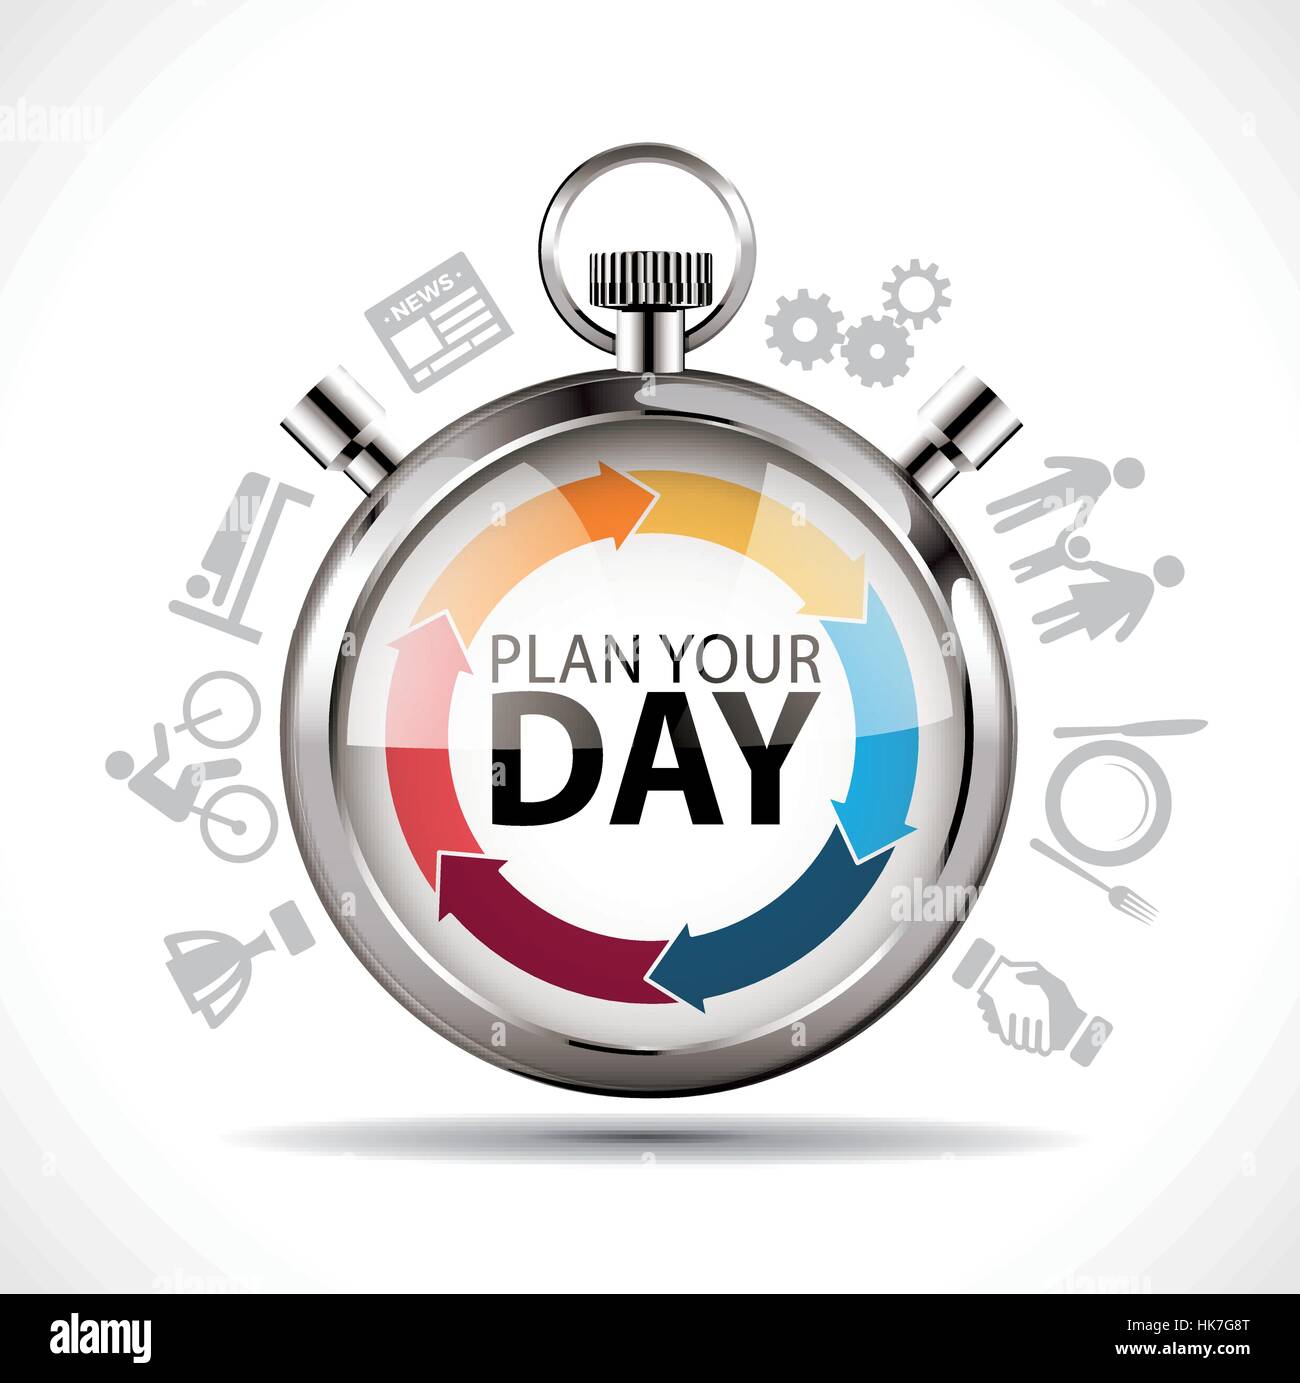 Plan your day - work and life concept Stock Vector